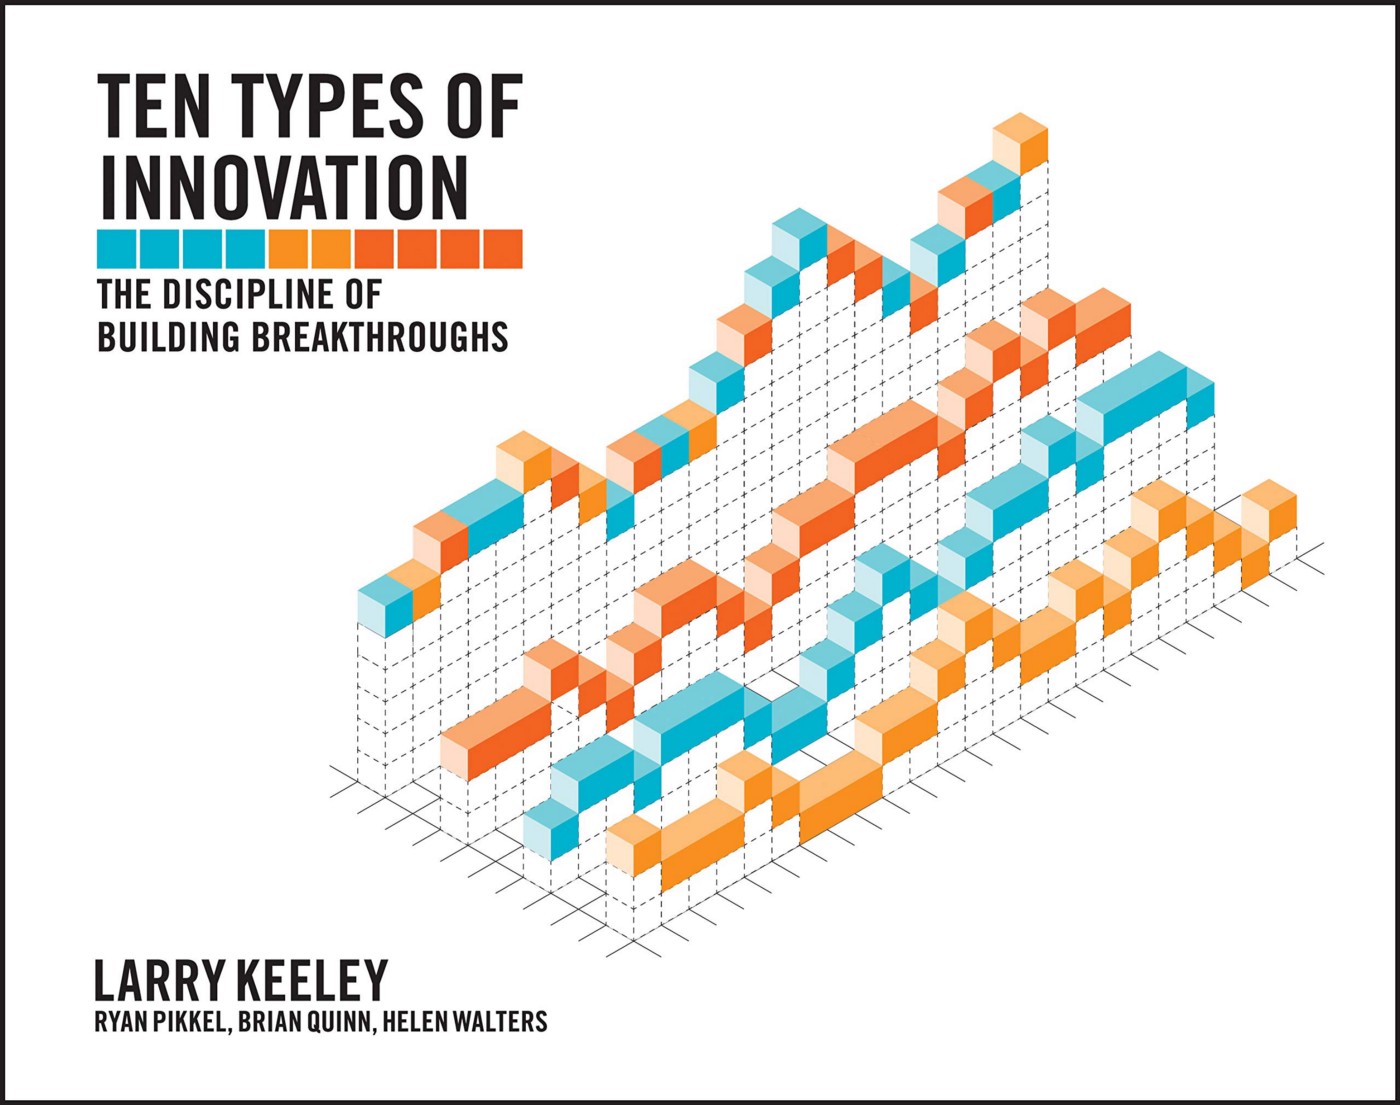 Book “Ten Types of Innovation” by Larry Keeley